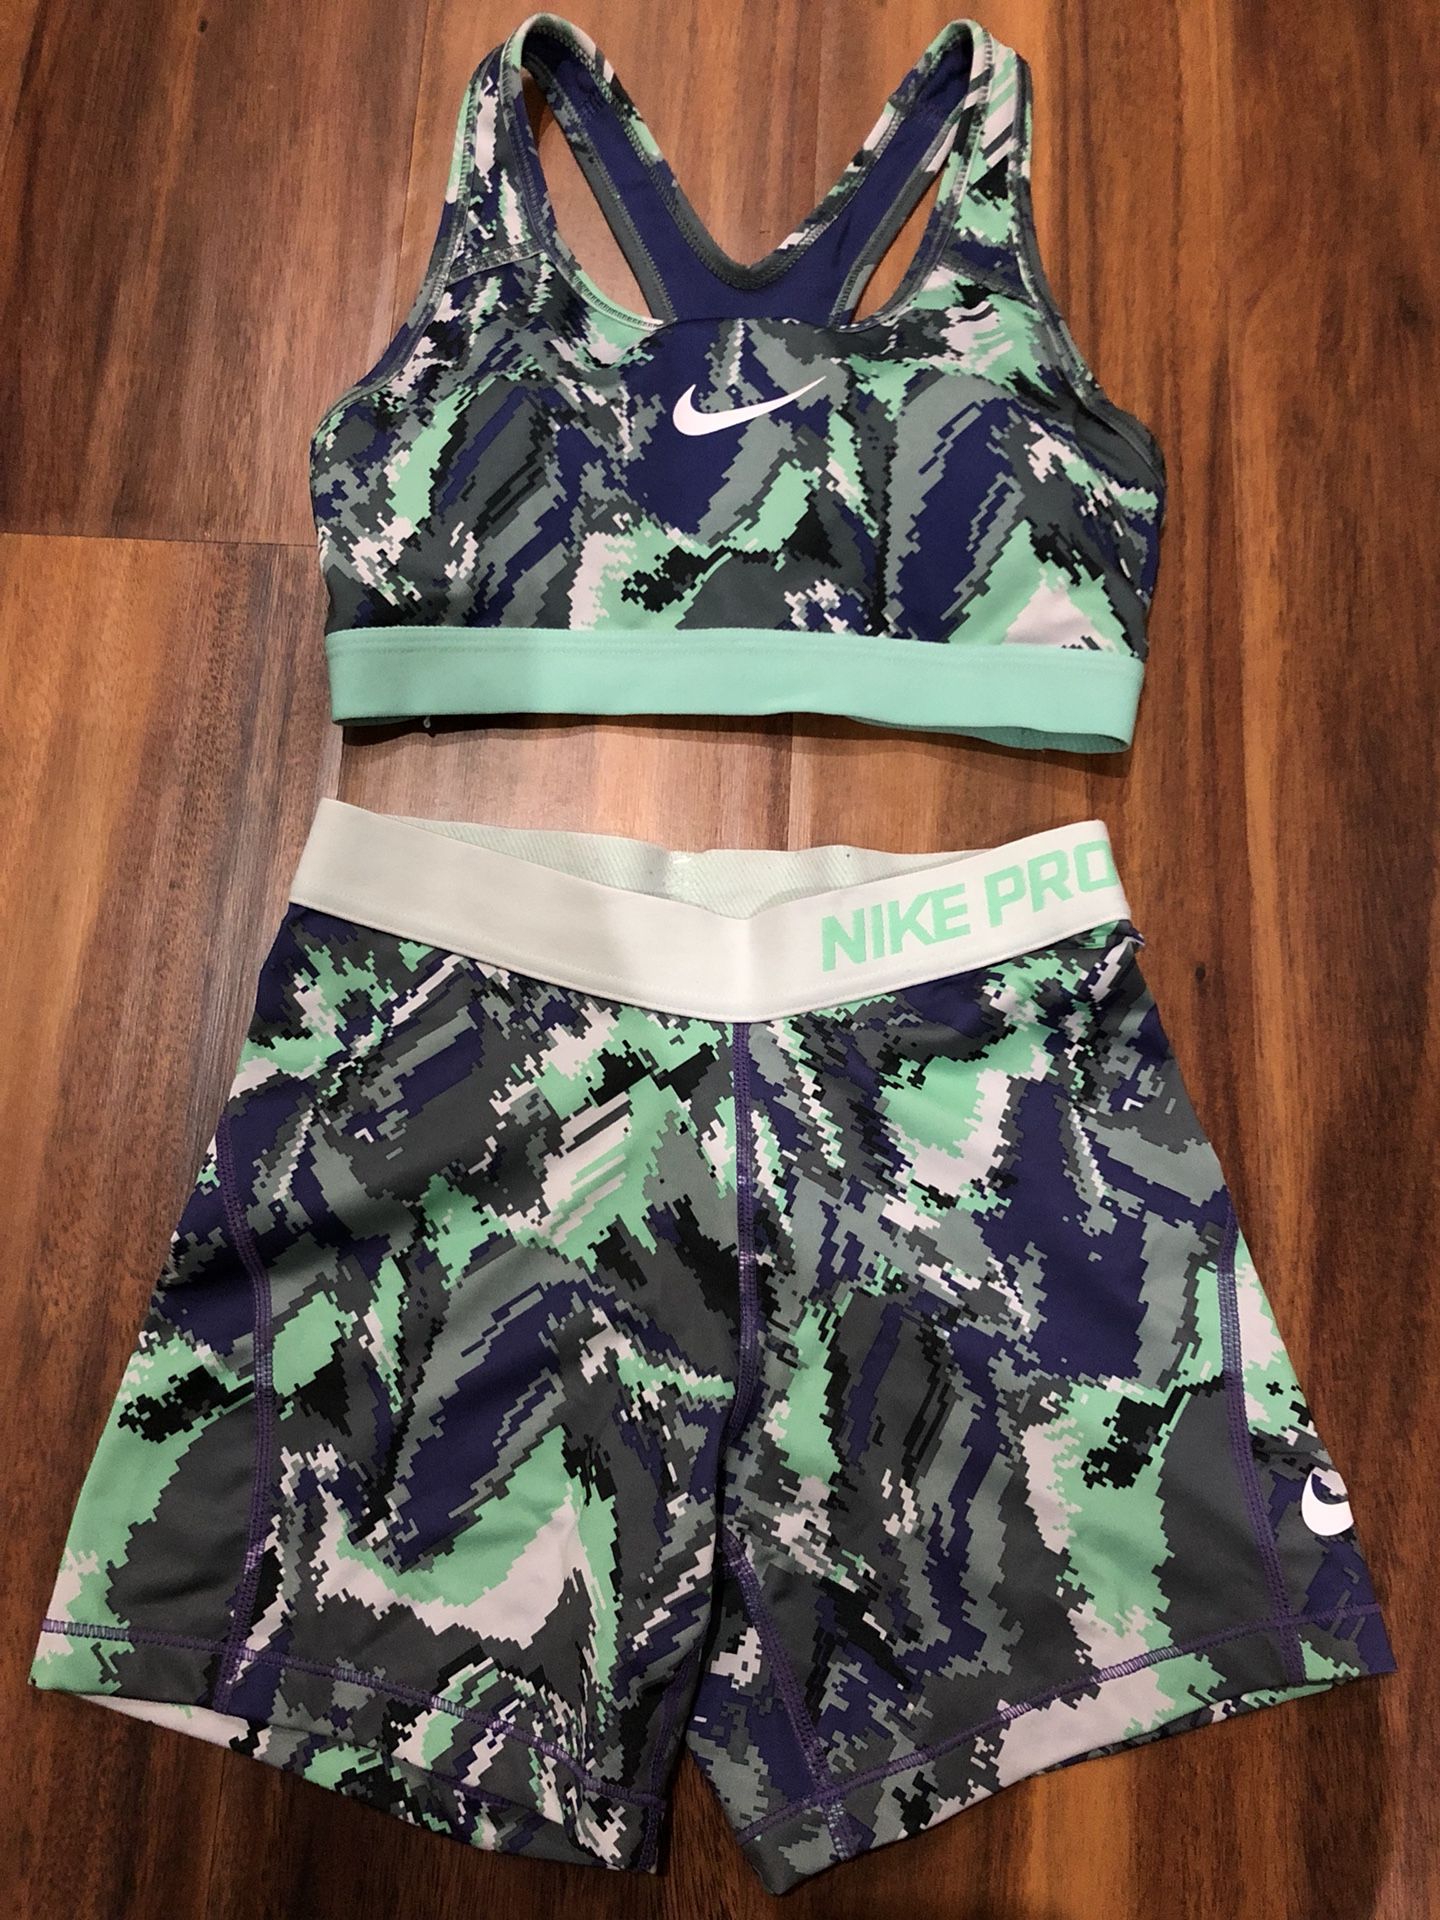 Nike Pro shorts and sports bra set YL and Adult XS for Sale in